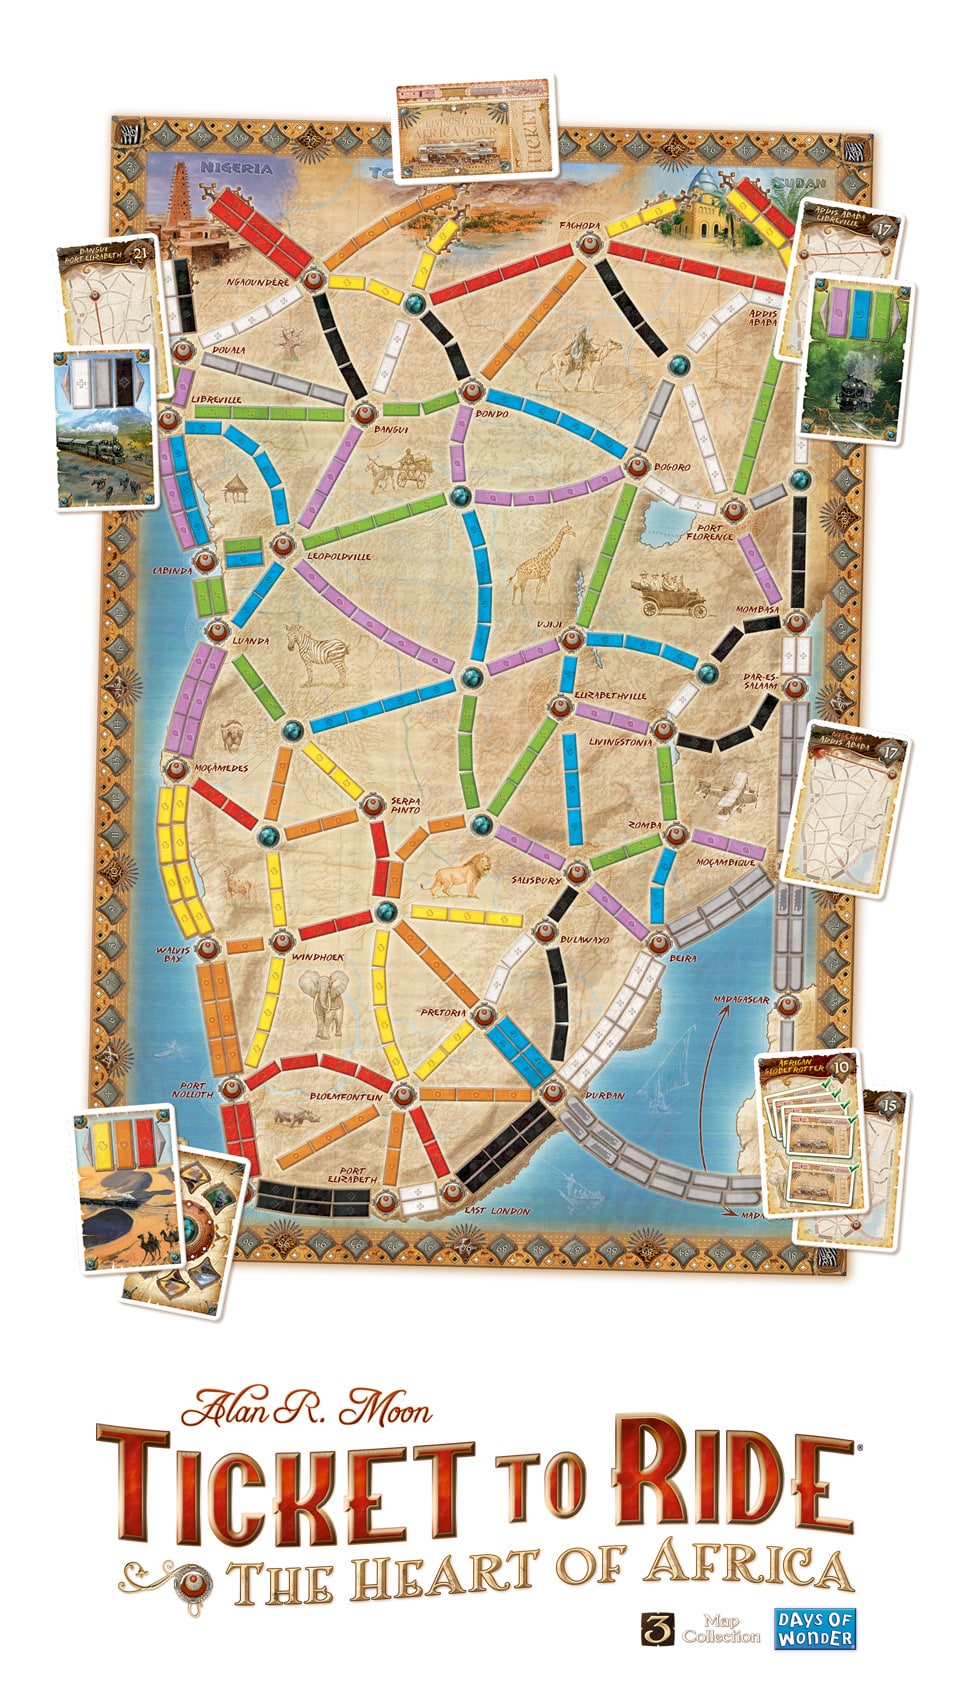 TICKET TO RIDE The Heart of Africa board